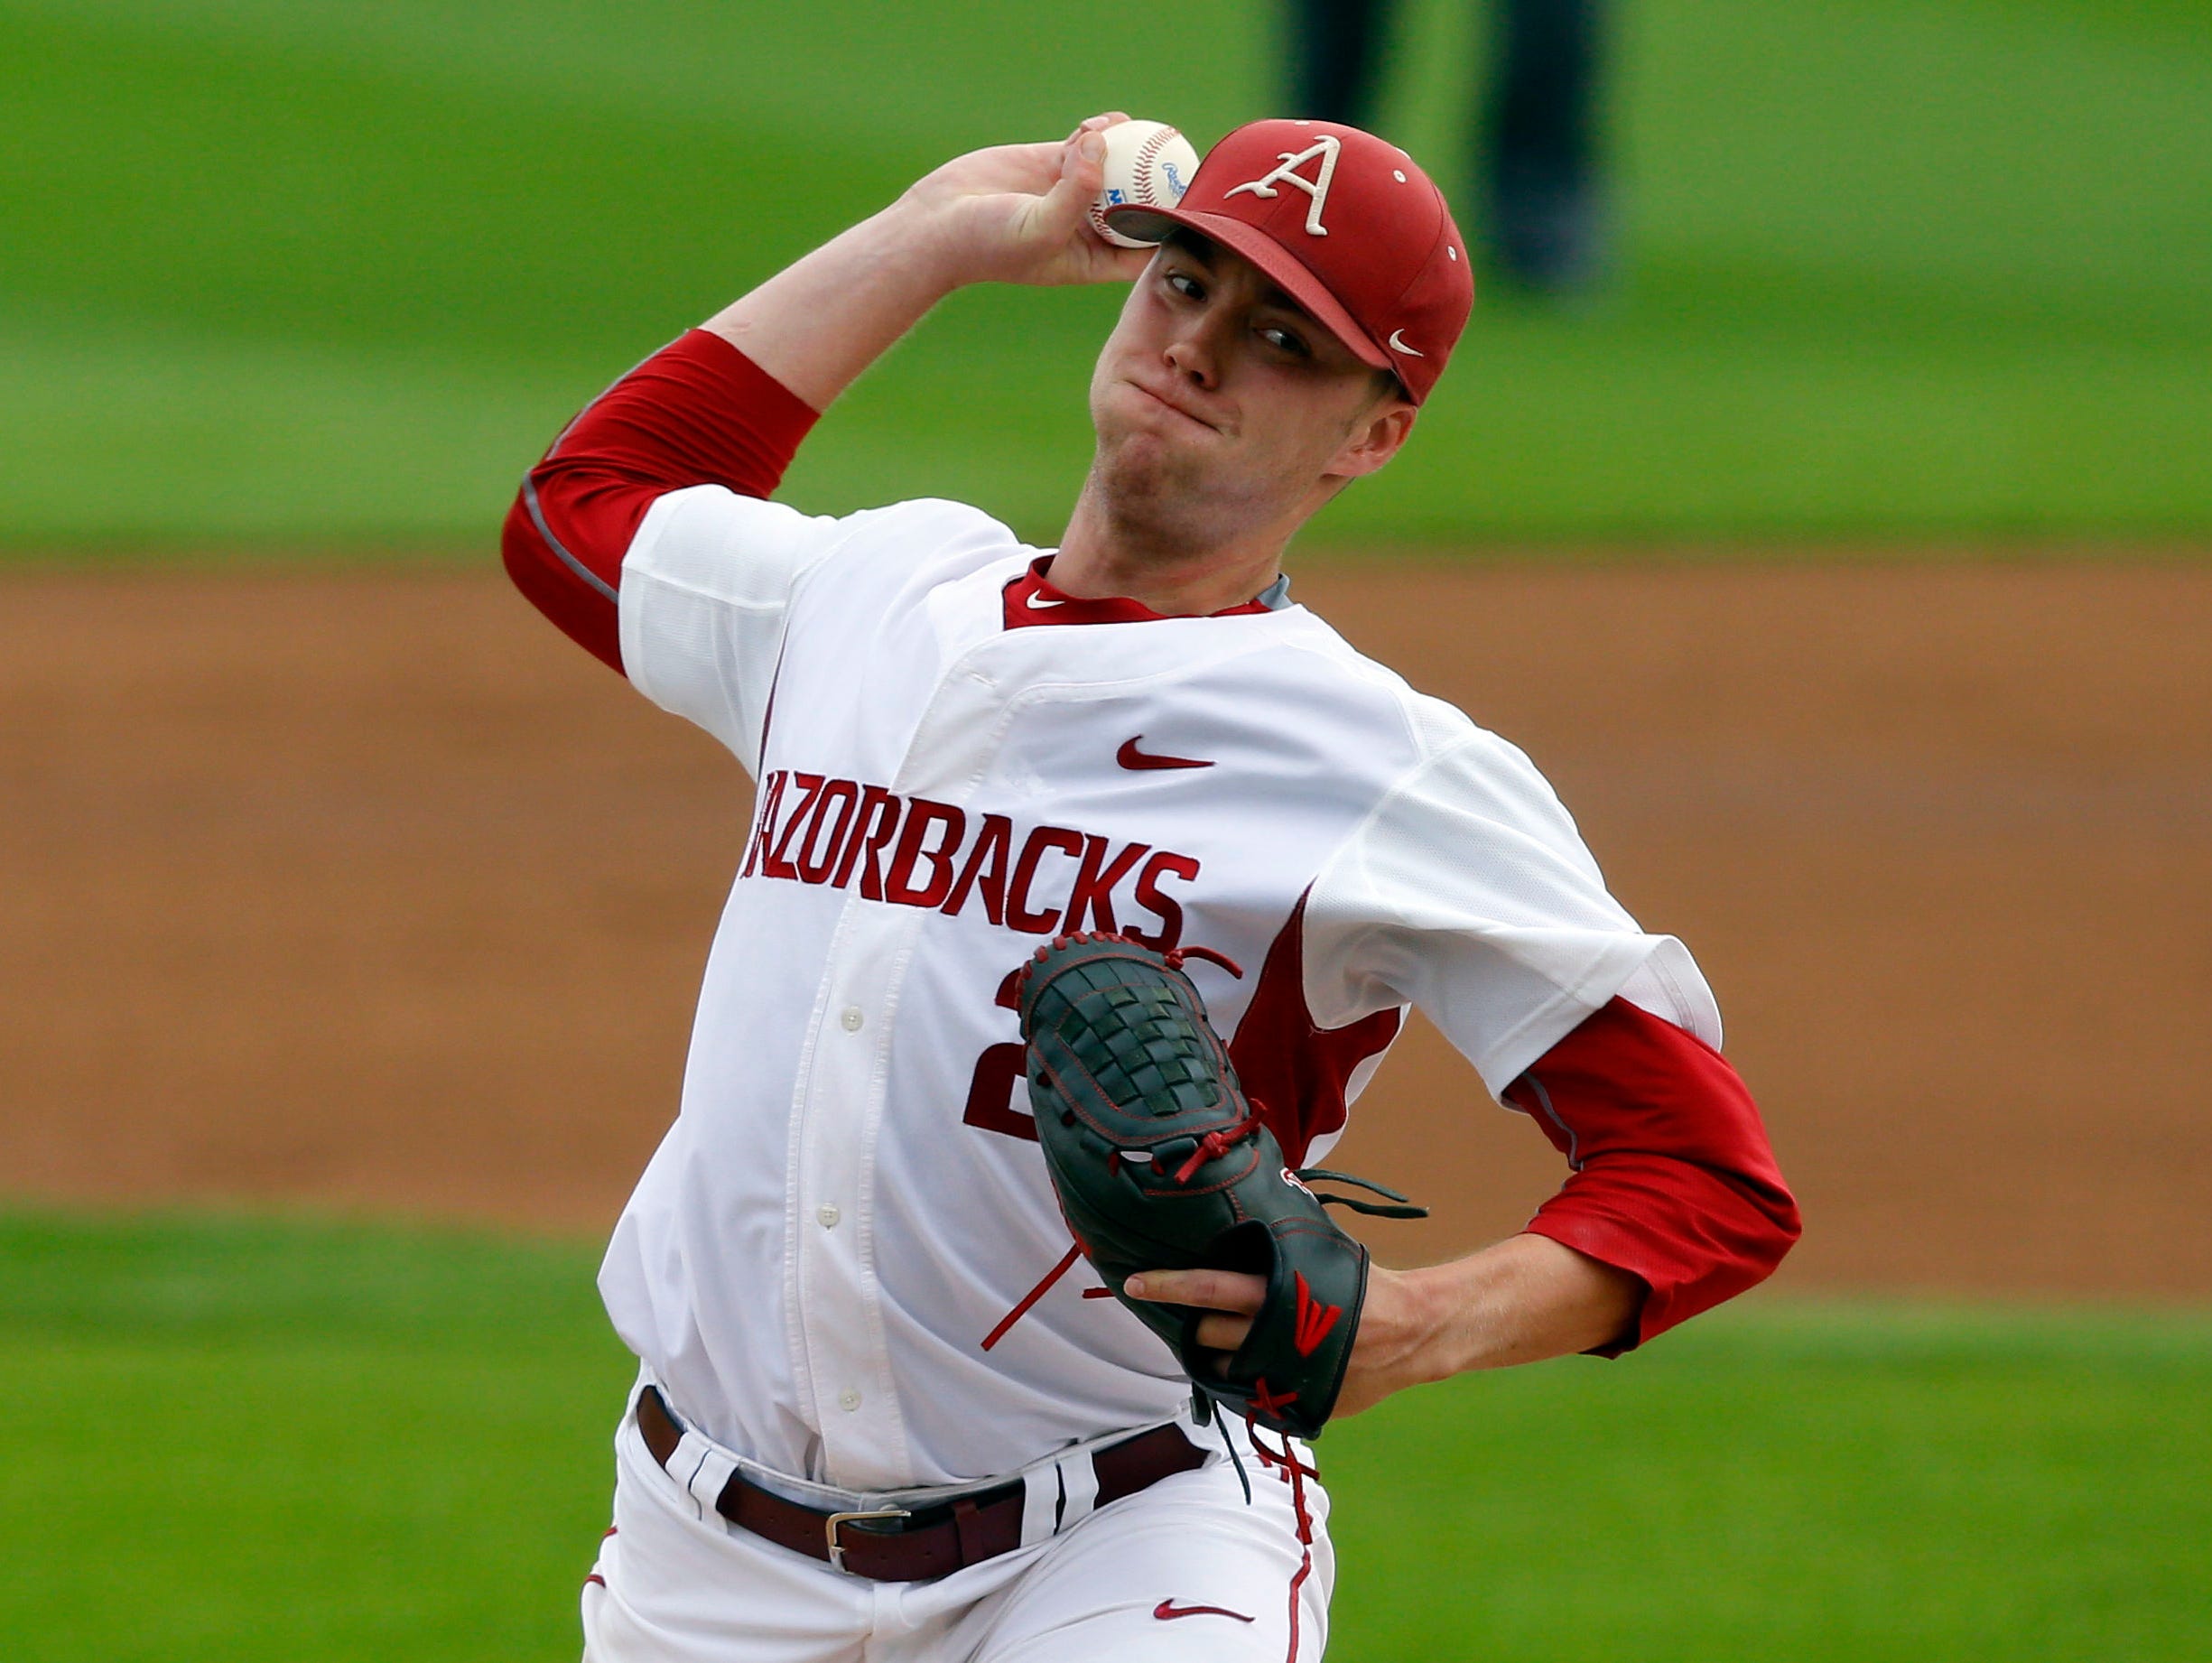 Mountain Home High grad Trey Killian got the start for Arkansas, but didn’t figure in the decision after giving up eight hits with three runs (all earned) and five strikeouts over five innings. The Hogs rallied past Oral Roberts, 8-6, to win their opening game at the Stillwater Regional on Friday.